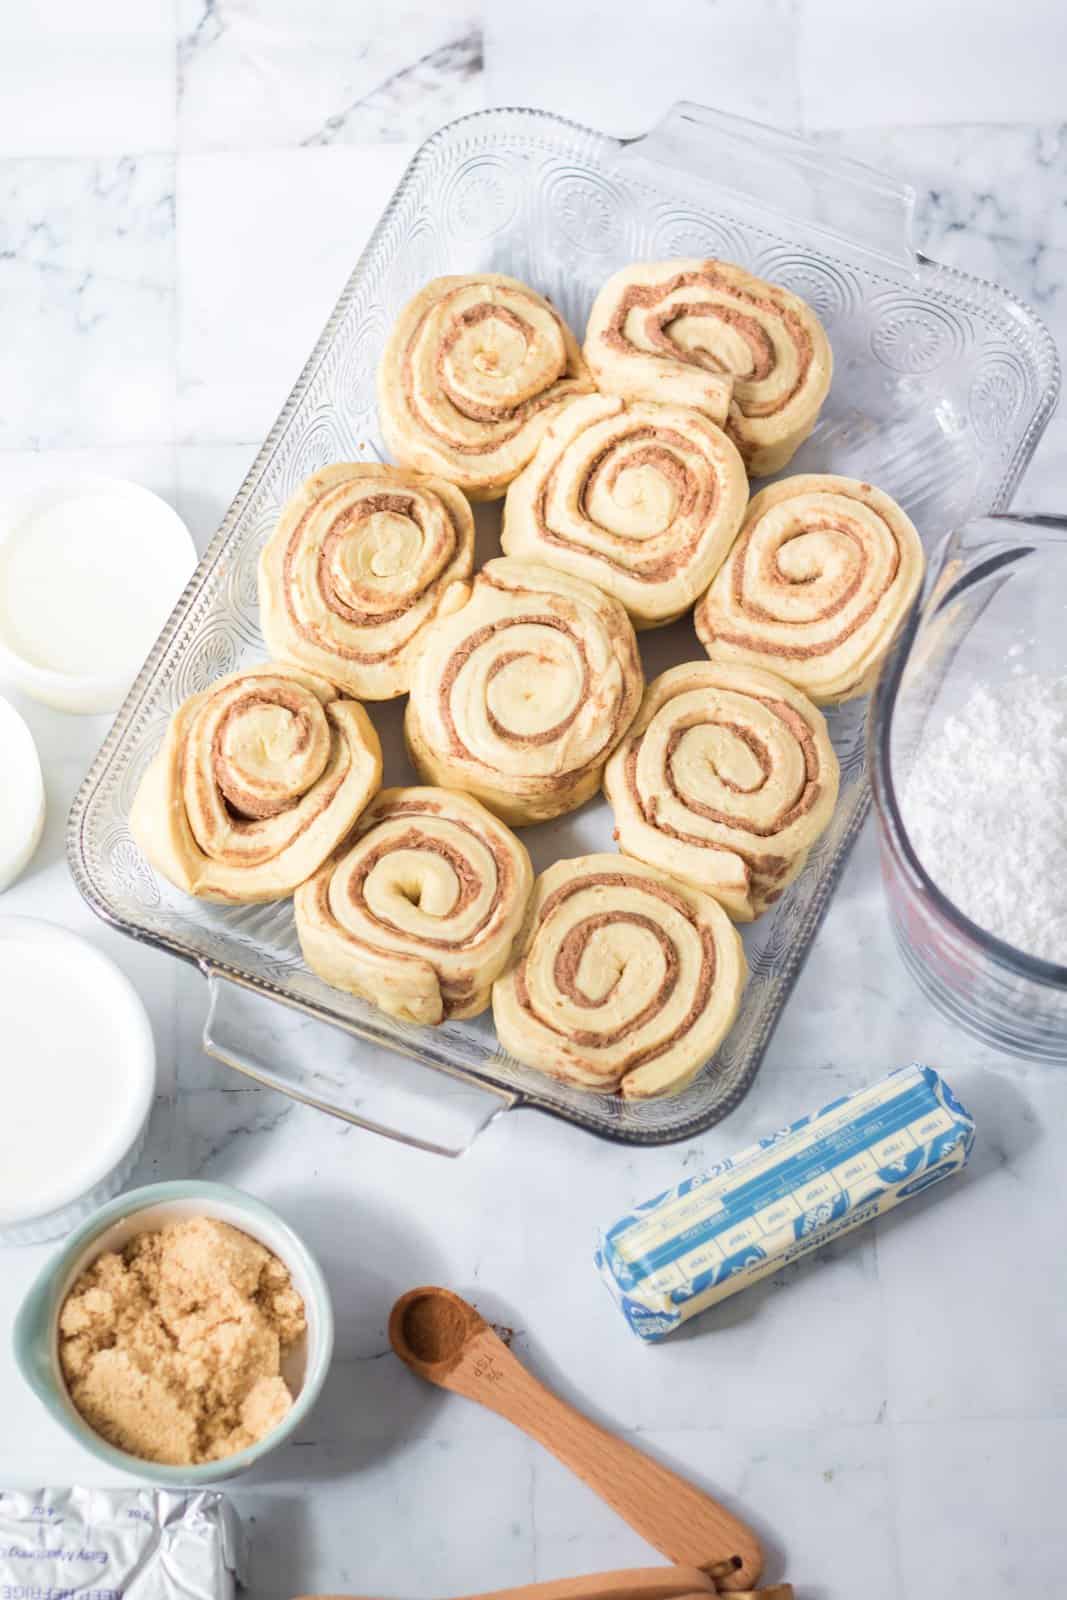 Ingredients needed: refrigerated grands cinnamon rolls, heavy whipping cream, butter, brown sugar, cinnamon, cream cheese and powdered sugar.